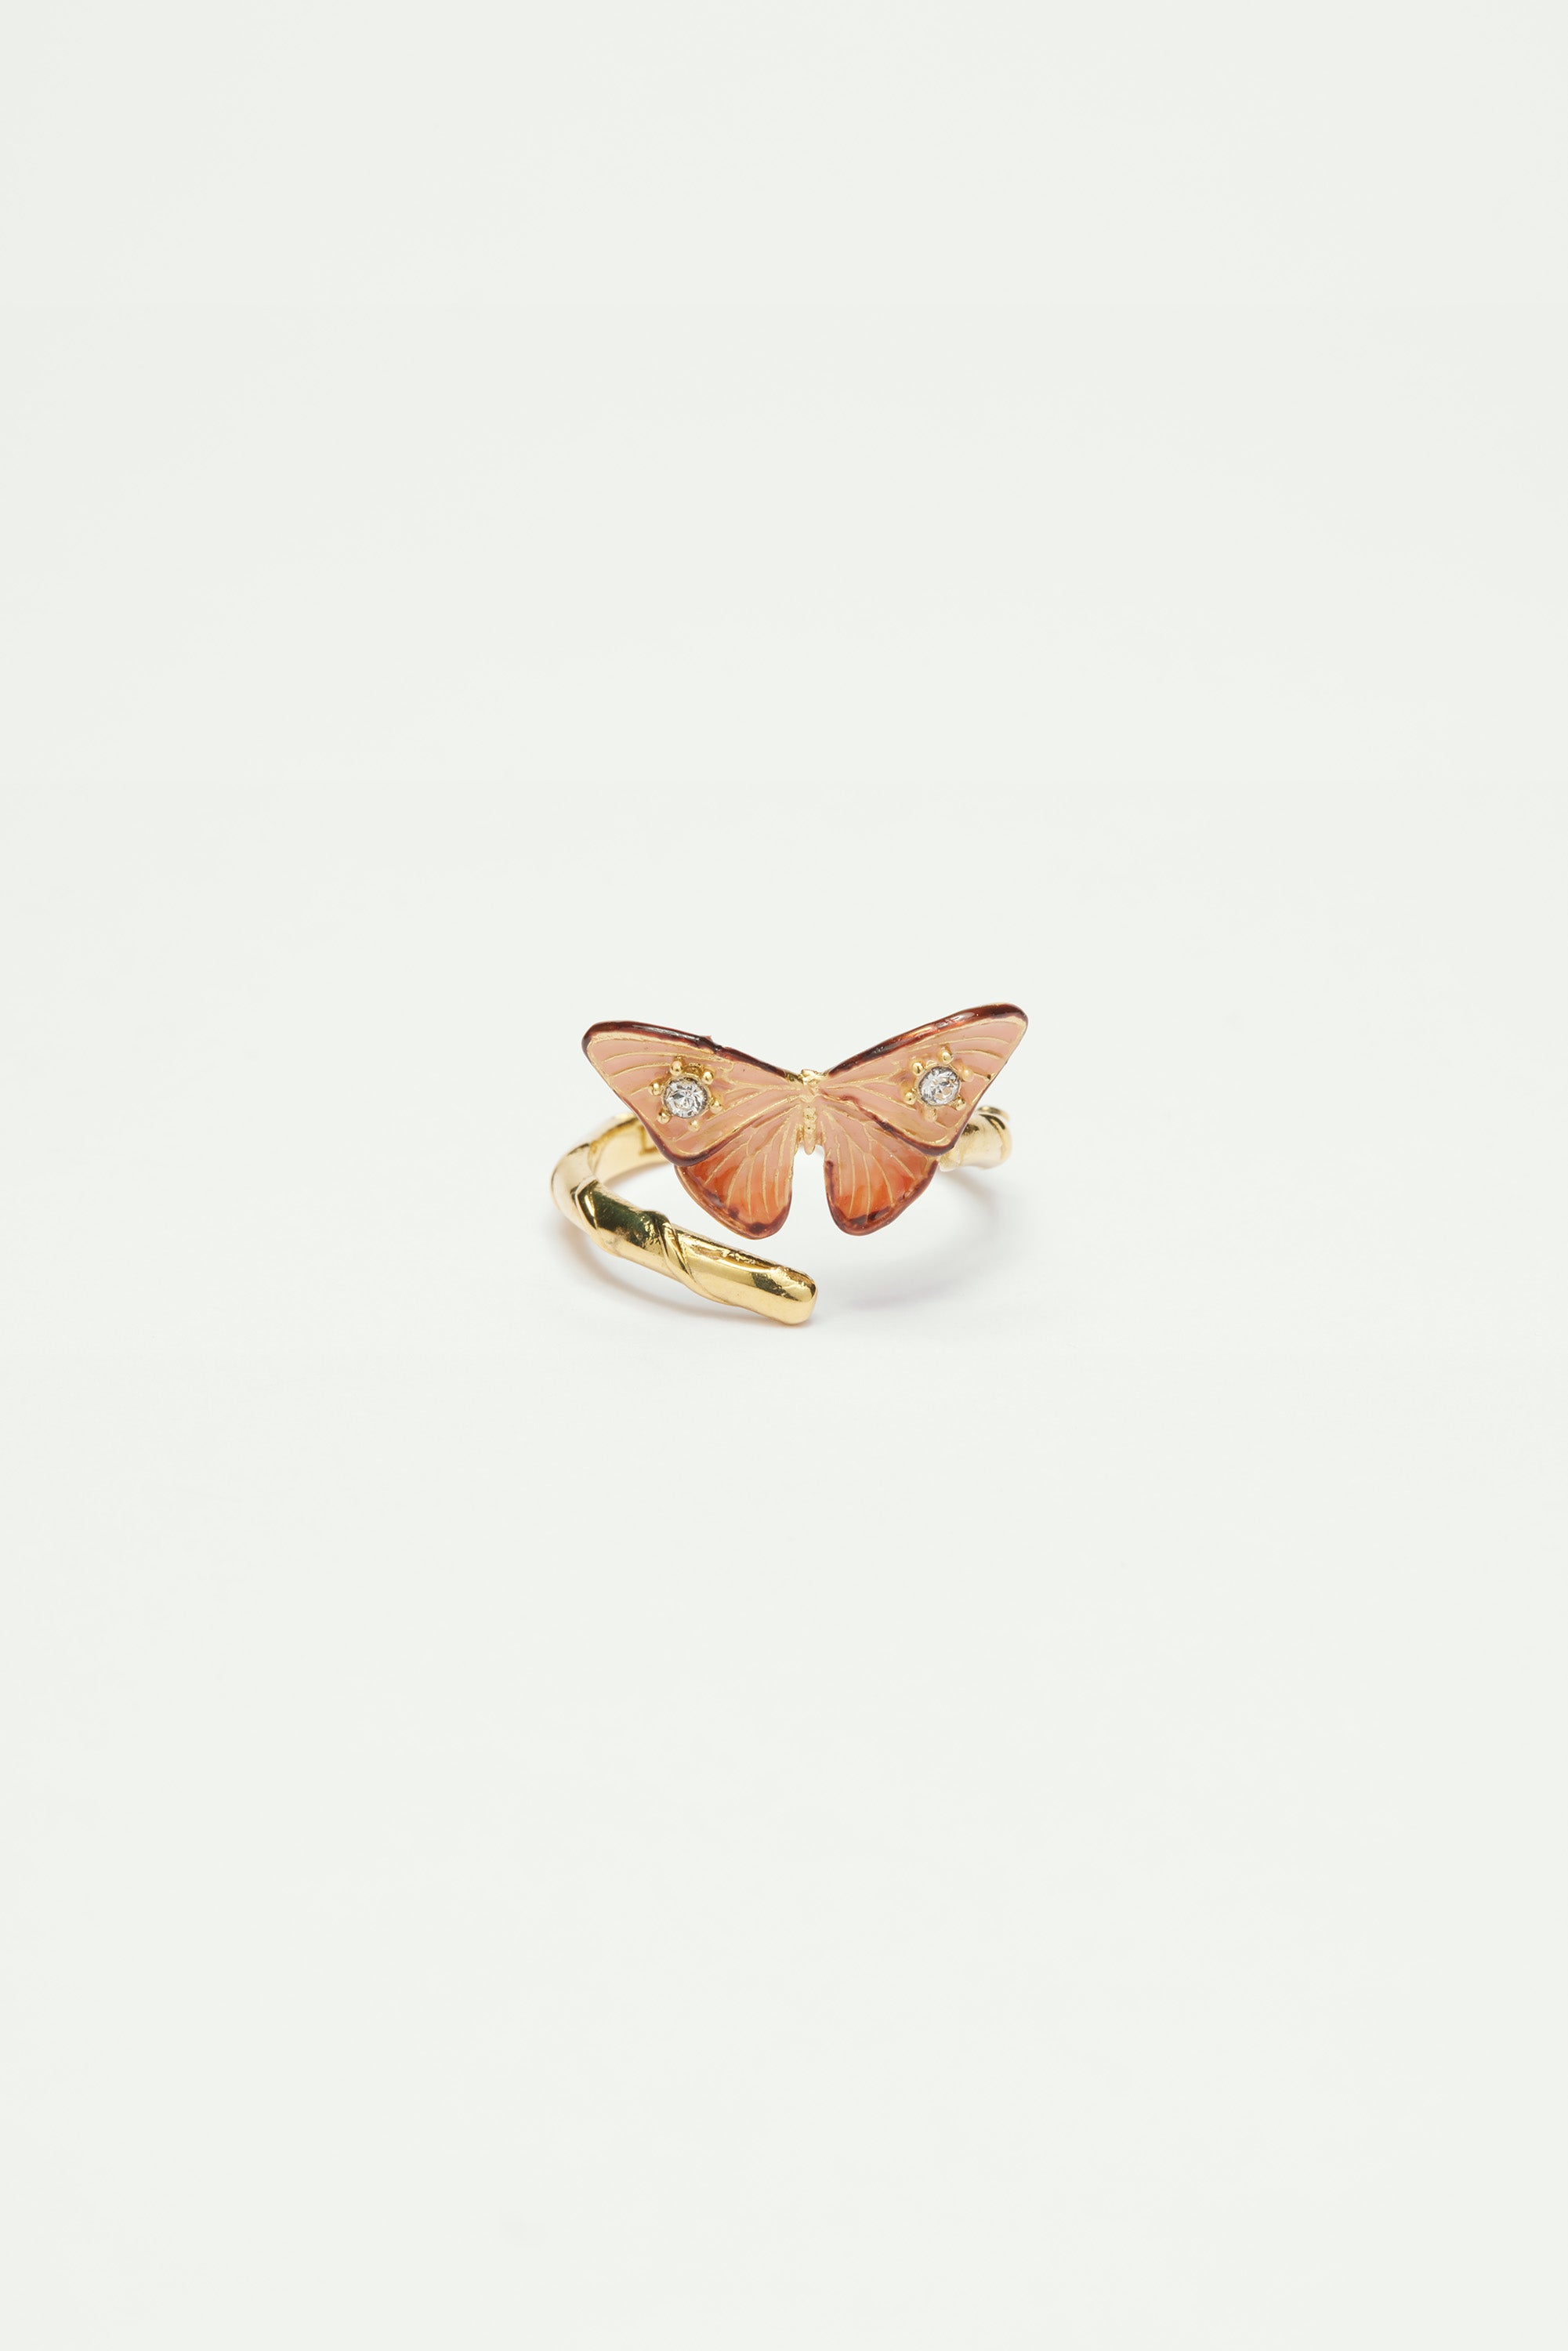 Enamelled butterfly and cut glass stone adjustable ring